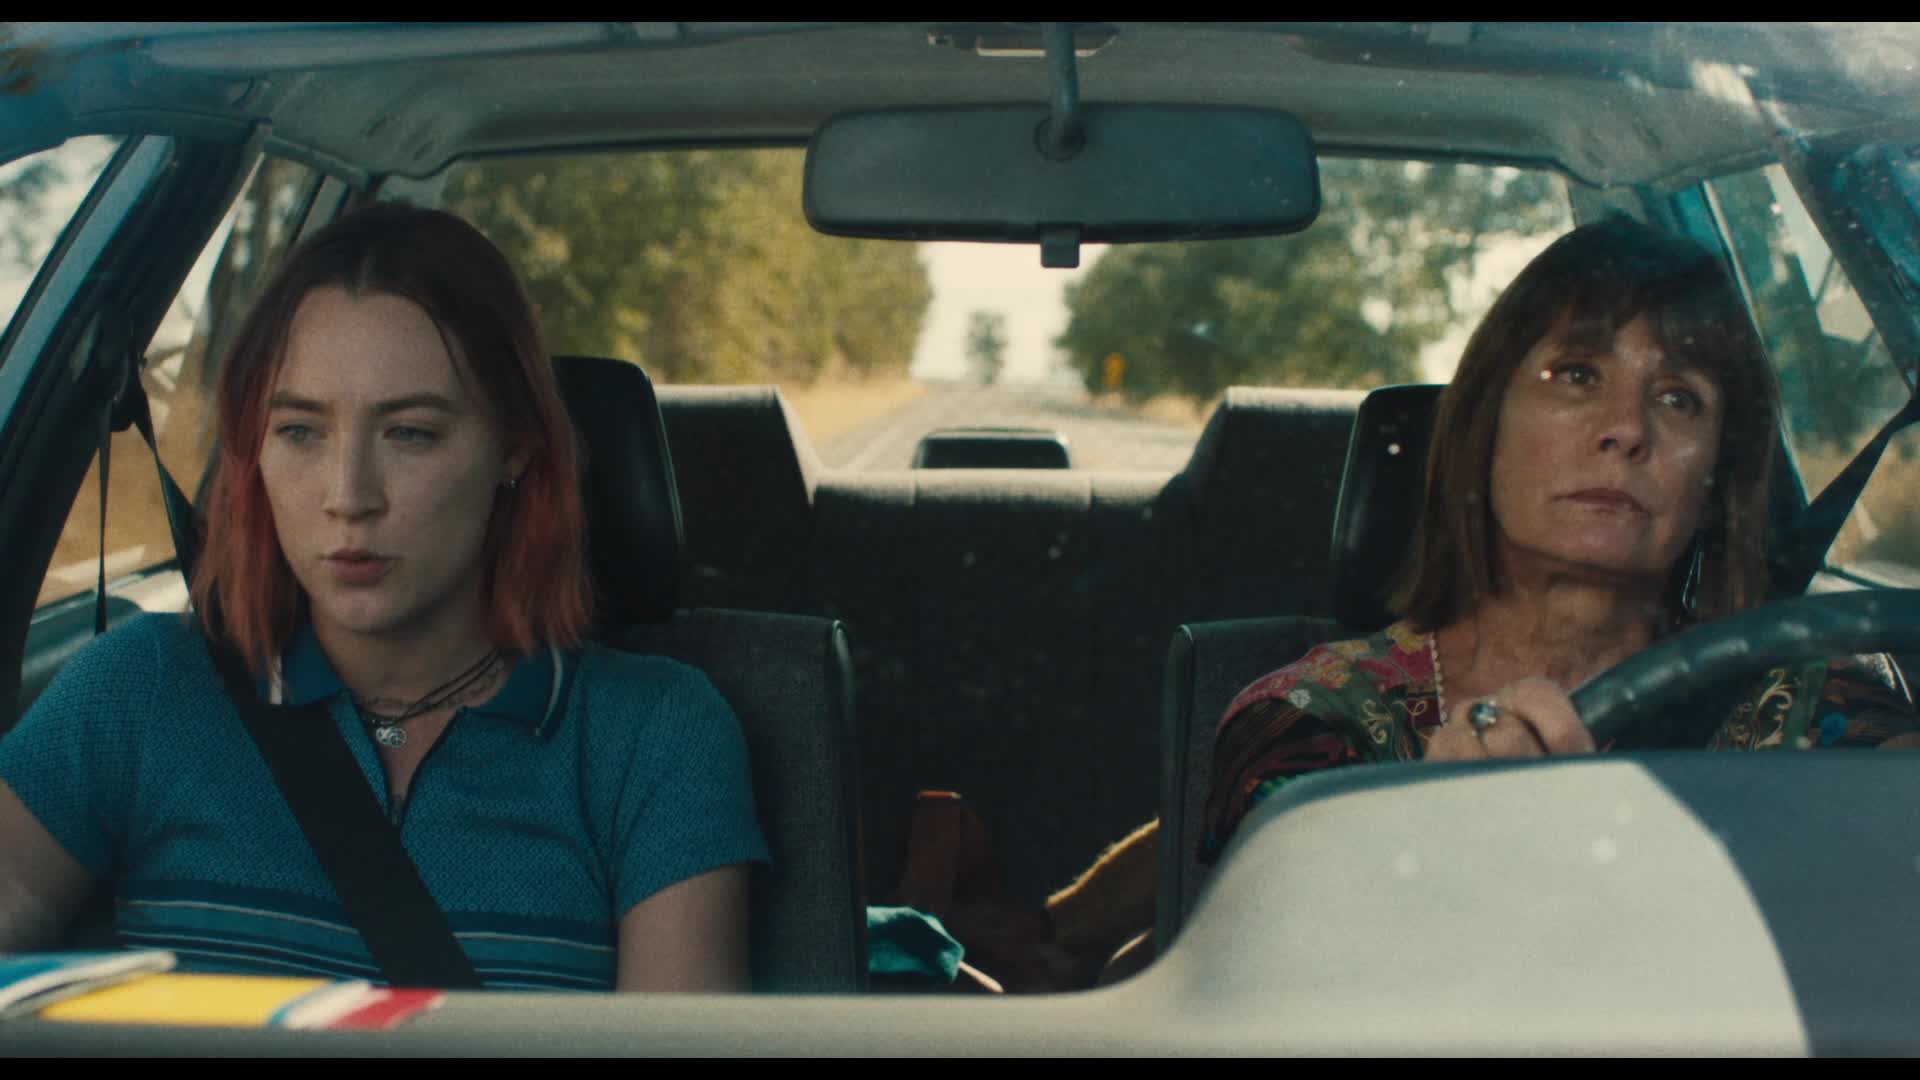 Lady Bird' flies high on wit and empathy. Humanizing The Vacuum